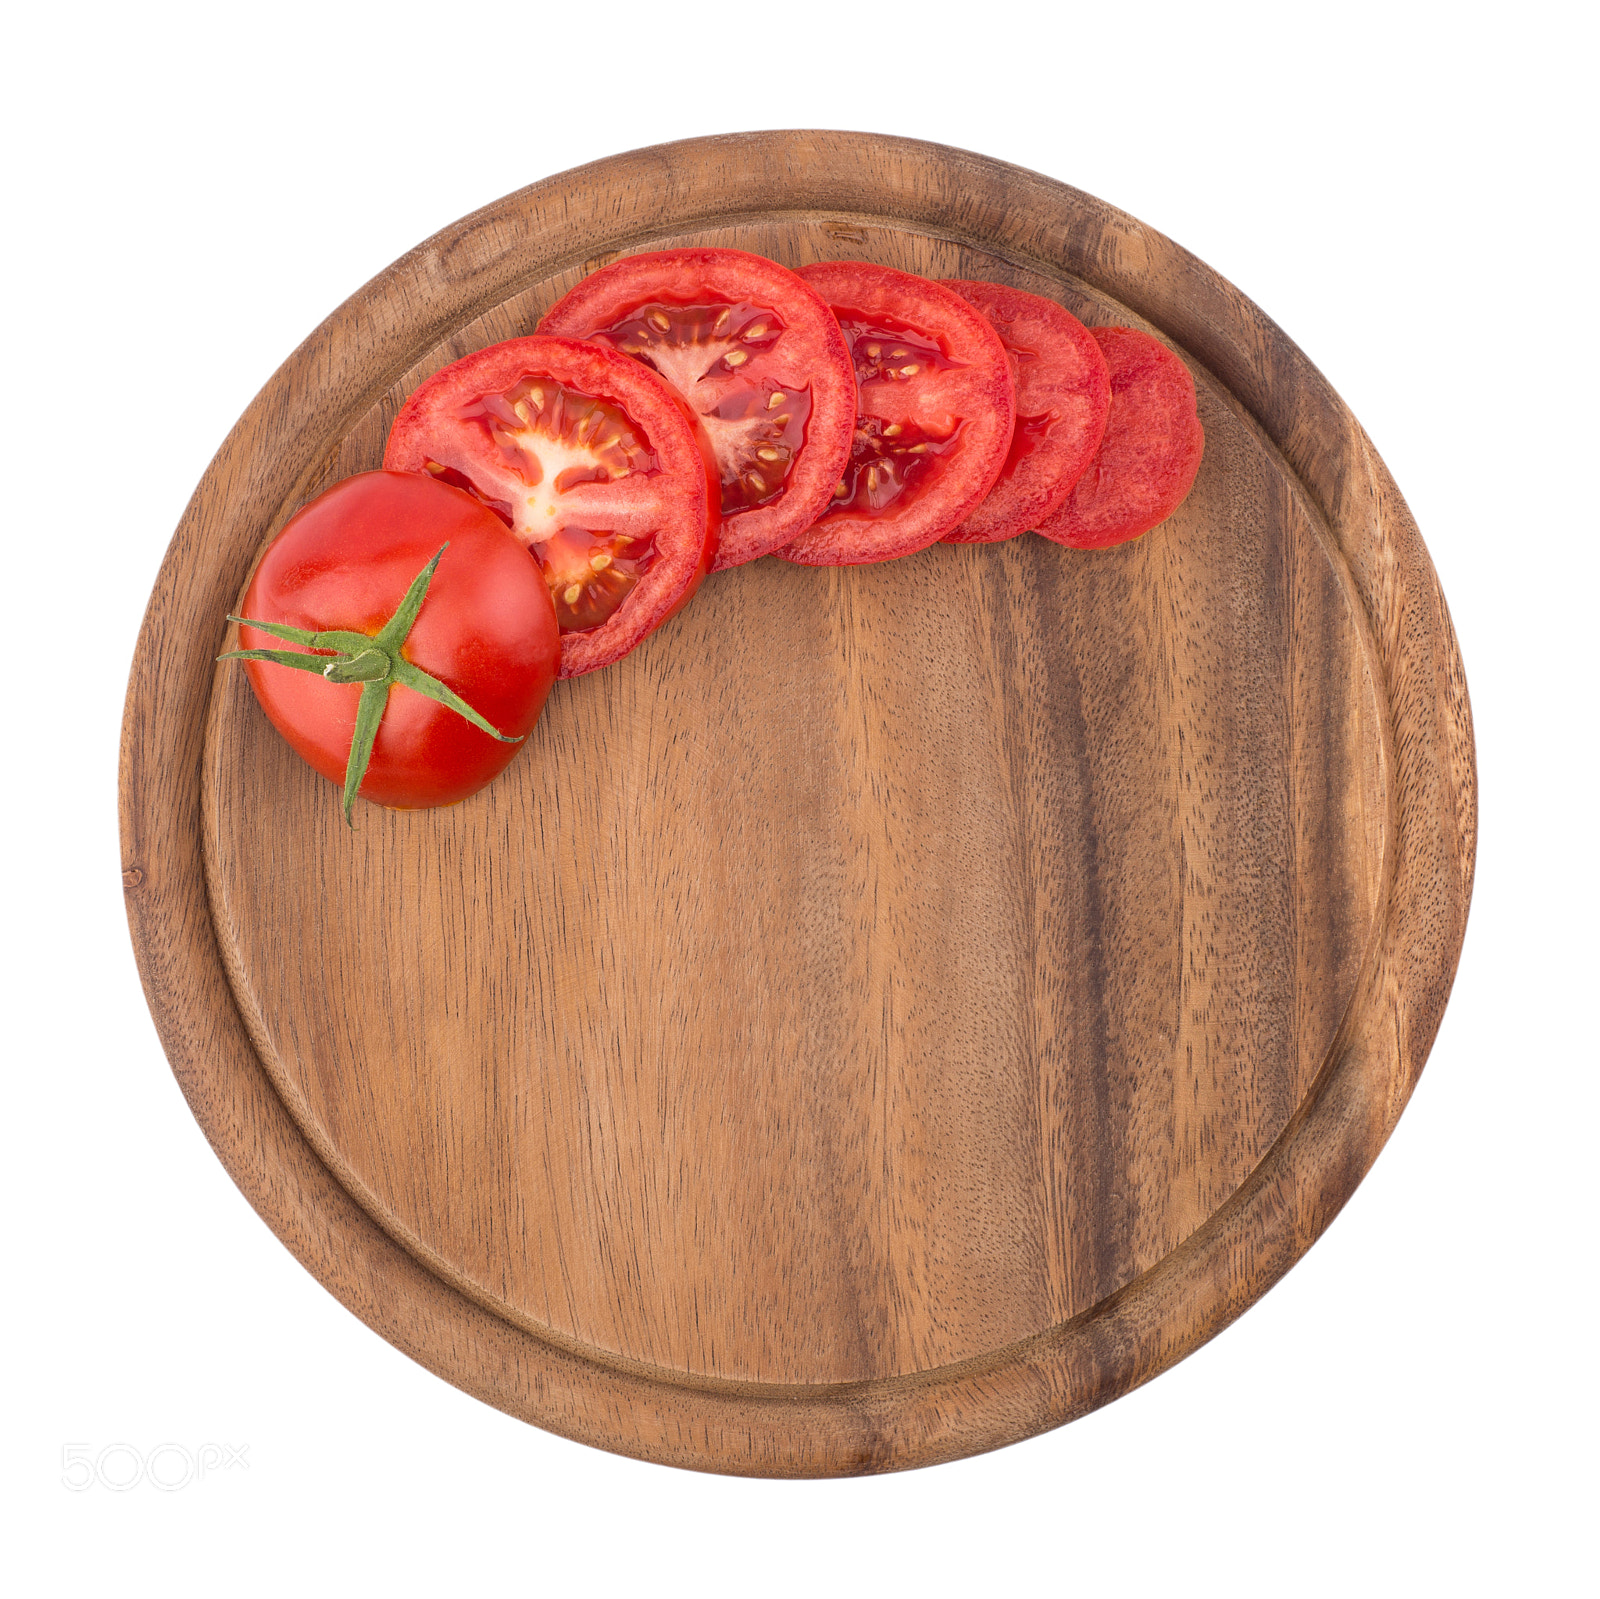 Sony a99 II sample photo. Chopped tomatoes on cutting board. photography